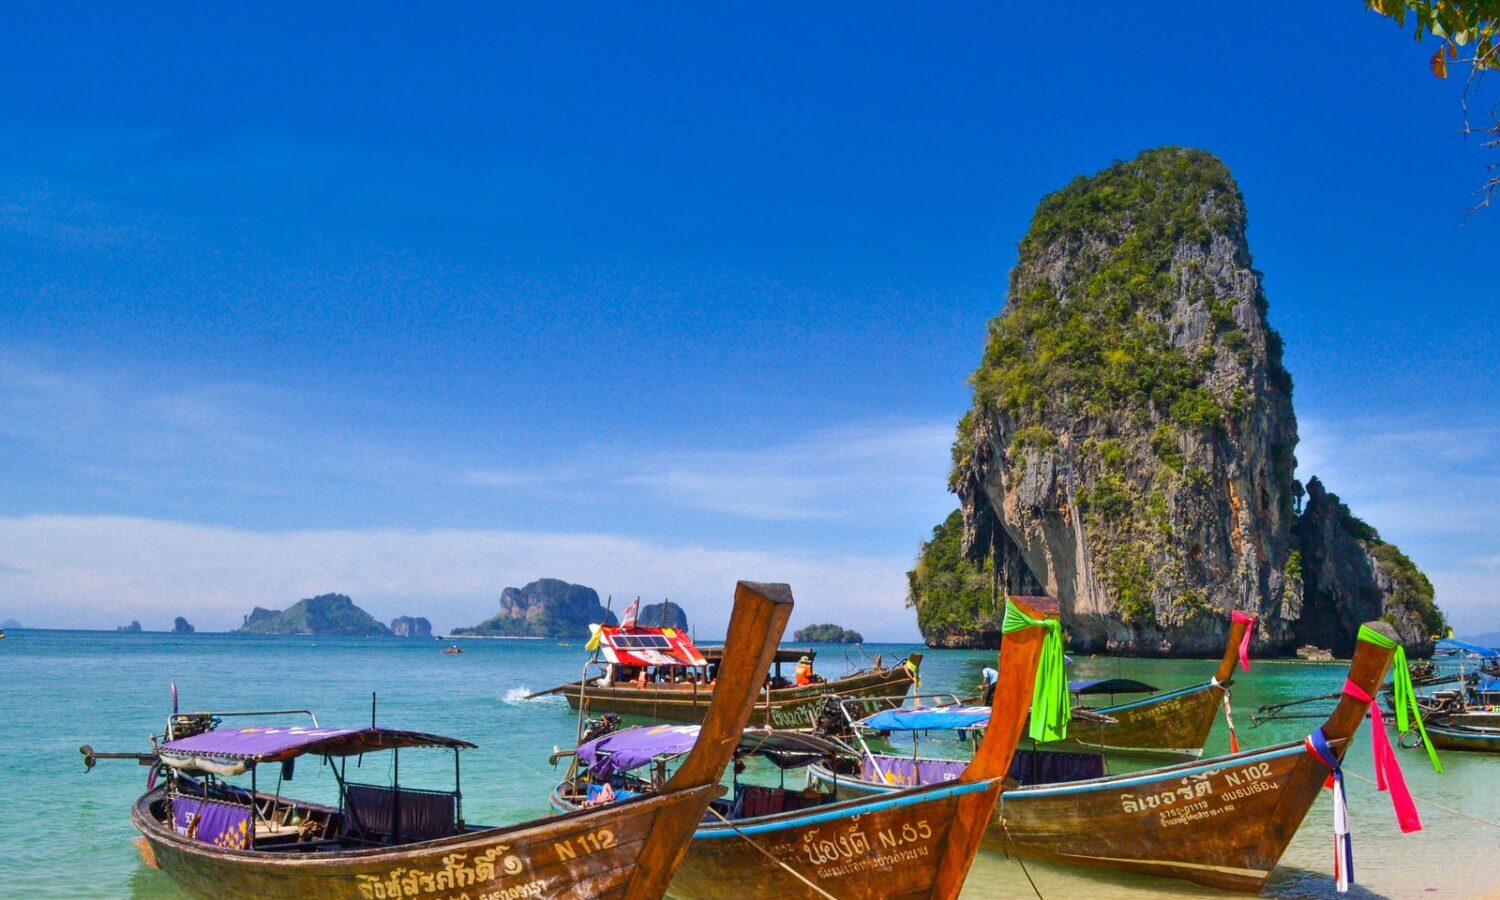 Traveling To Thailand? Here’s What You Should Know About The Country’s Weed Laws